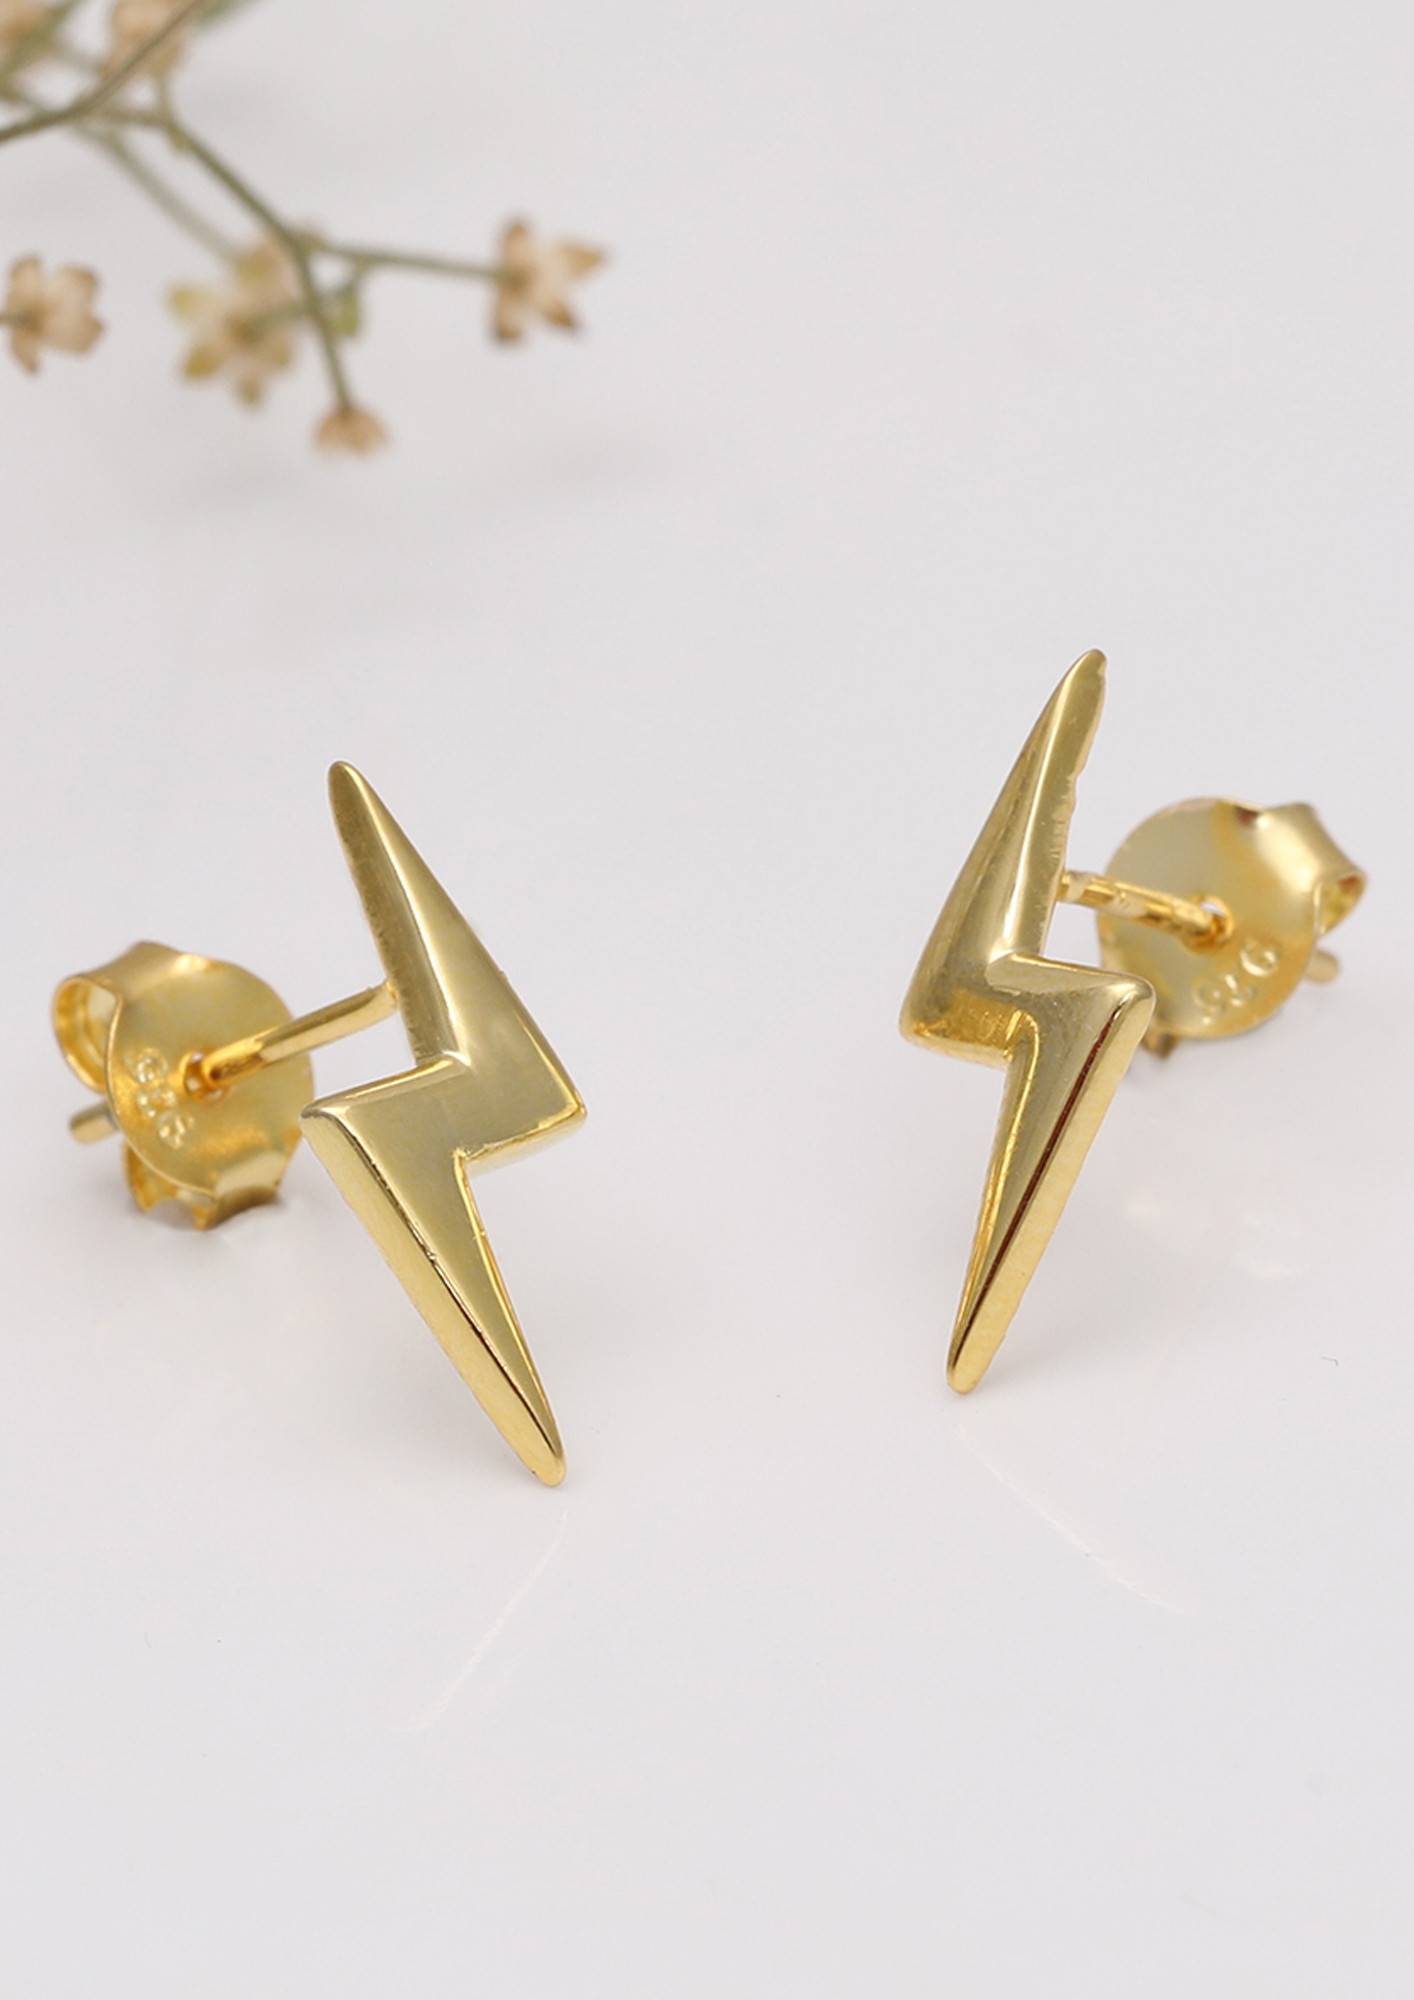 Lightning Bolt Stud Earrings  Gold Plated Sterling Silver  Wild at Heart